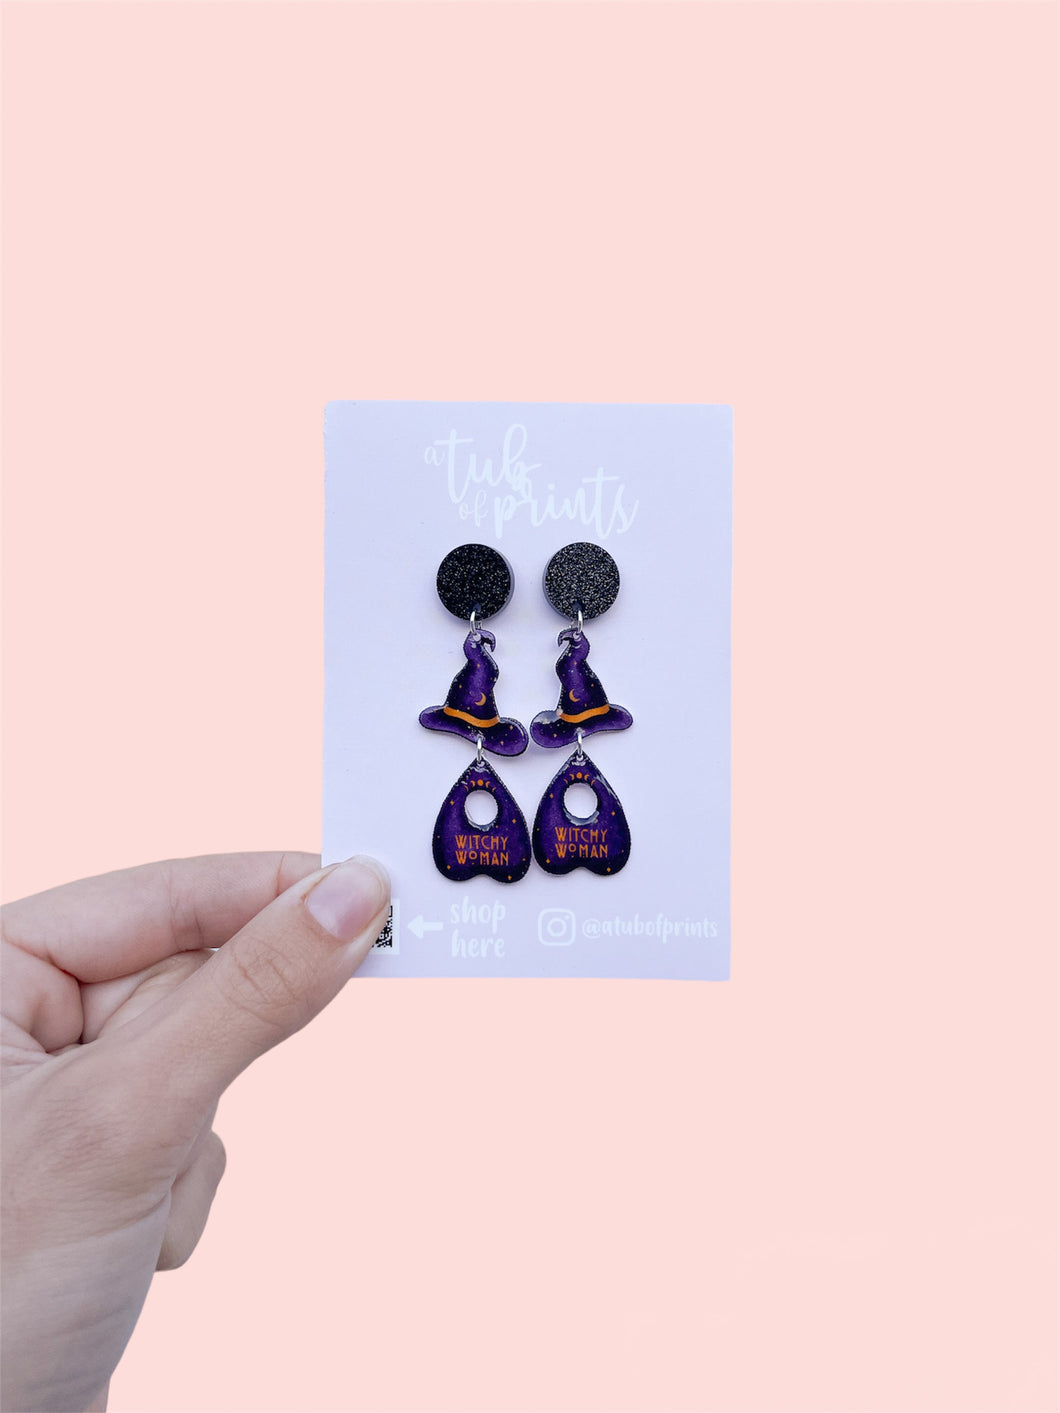 Witchy Woman Dangle Earrings